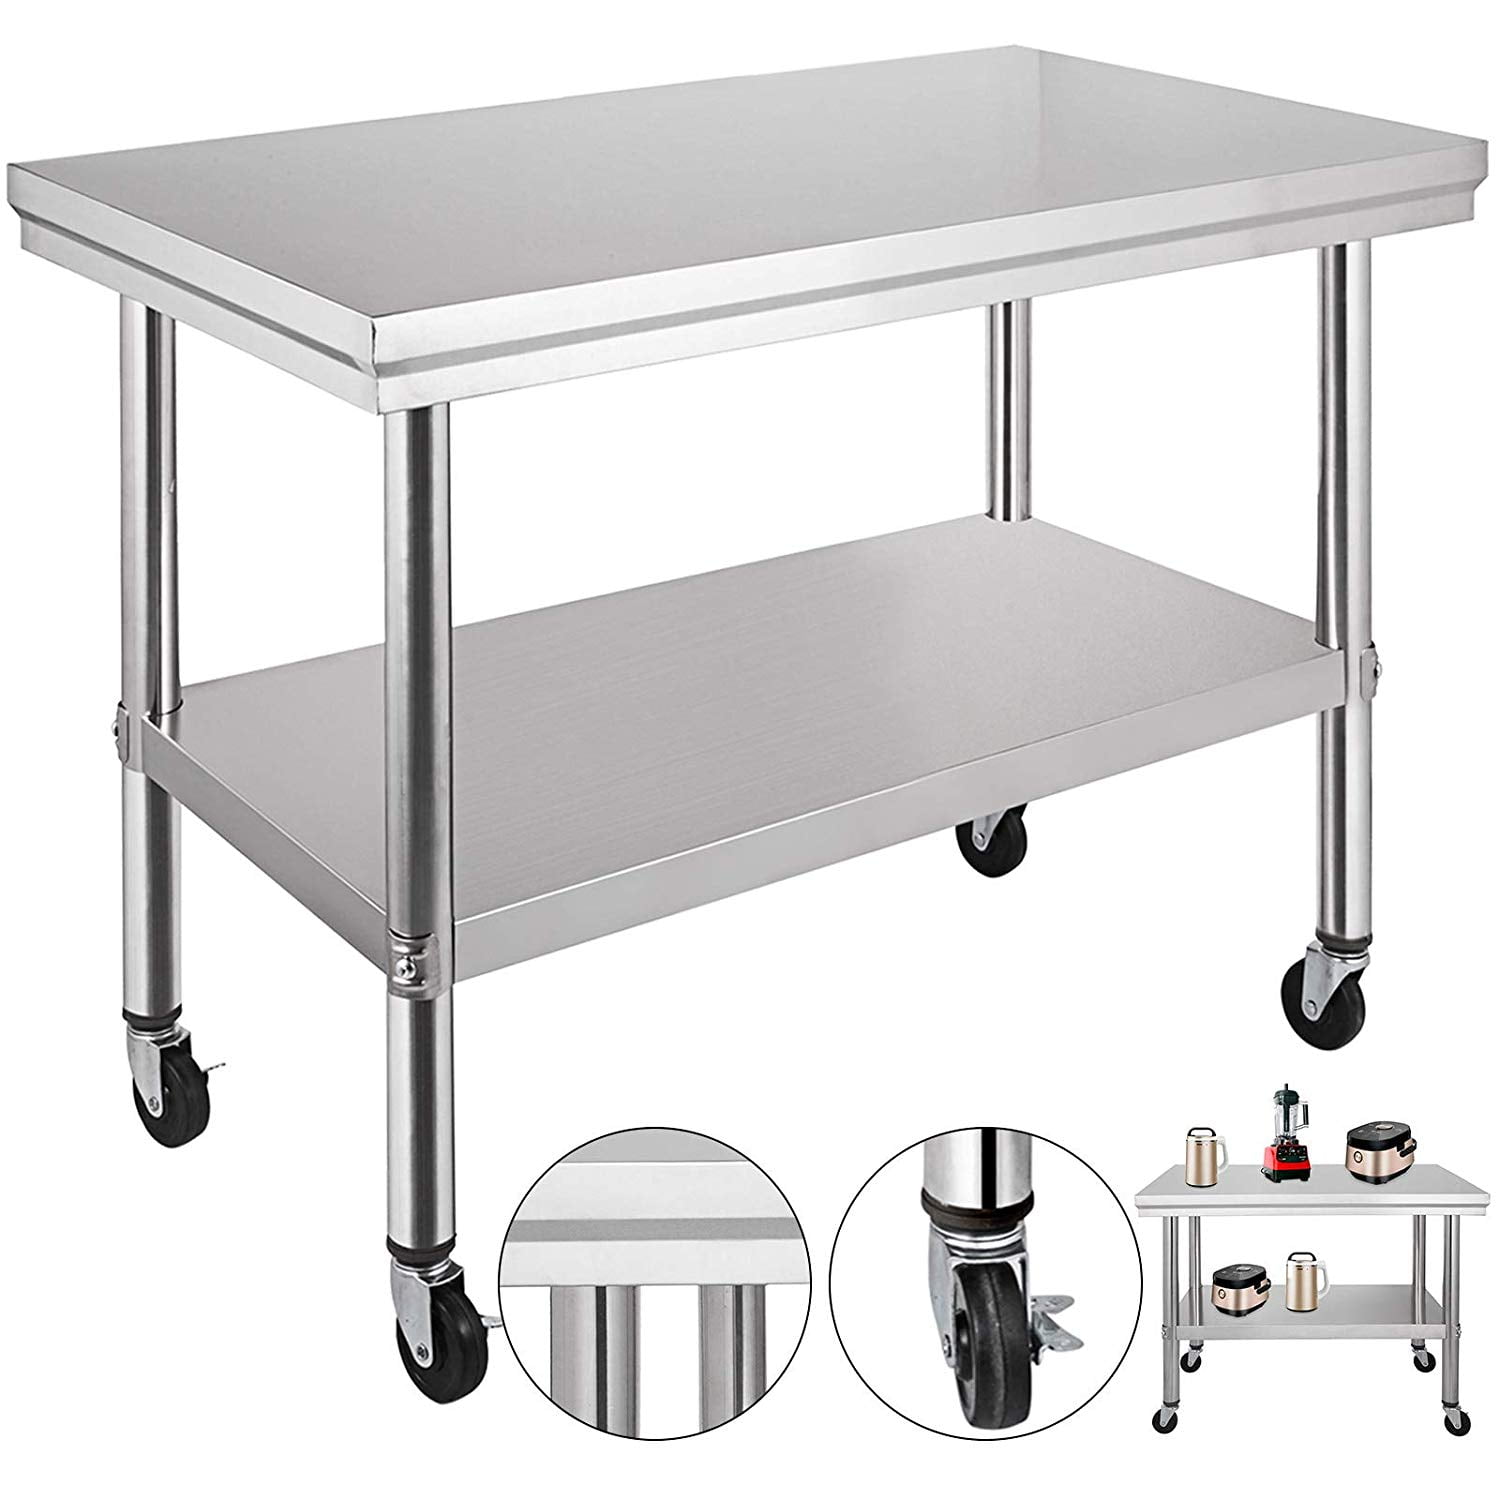 24 x 30 x 32 Inch Stainless Steel Work Table with casters ...